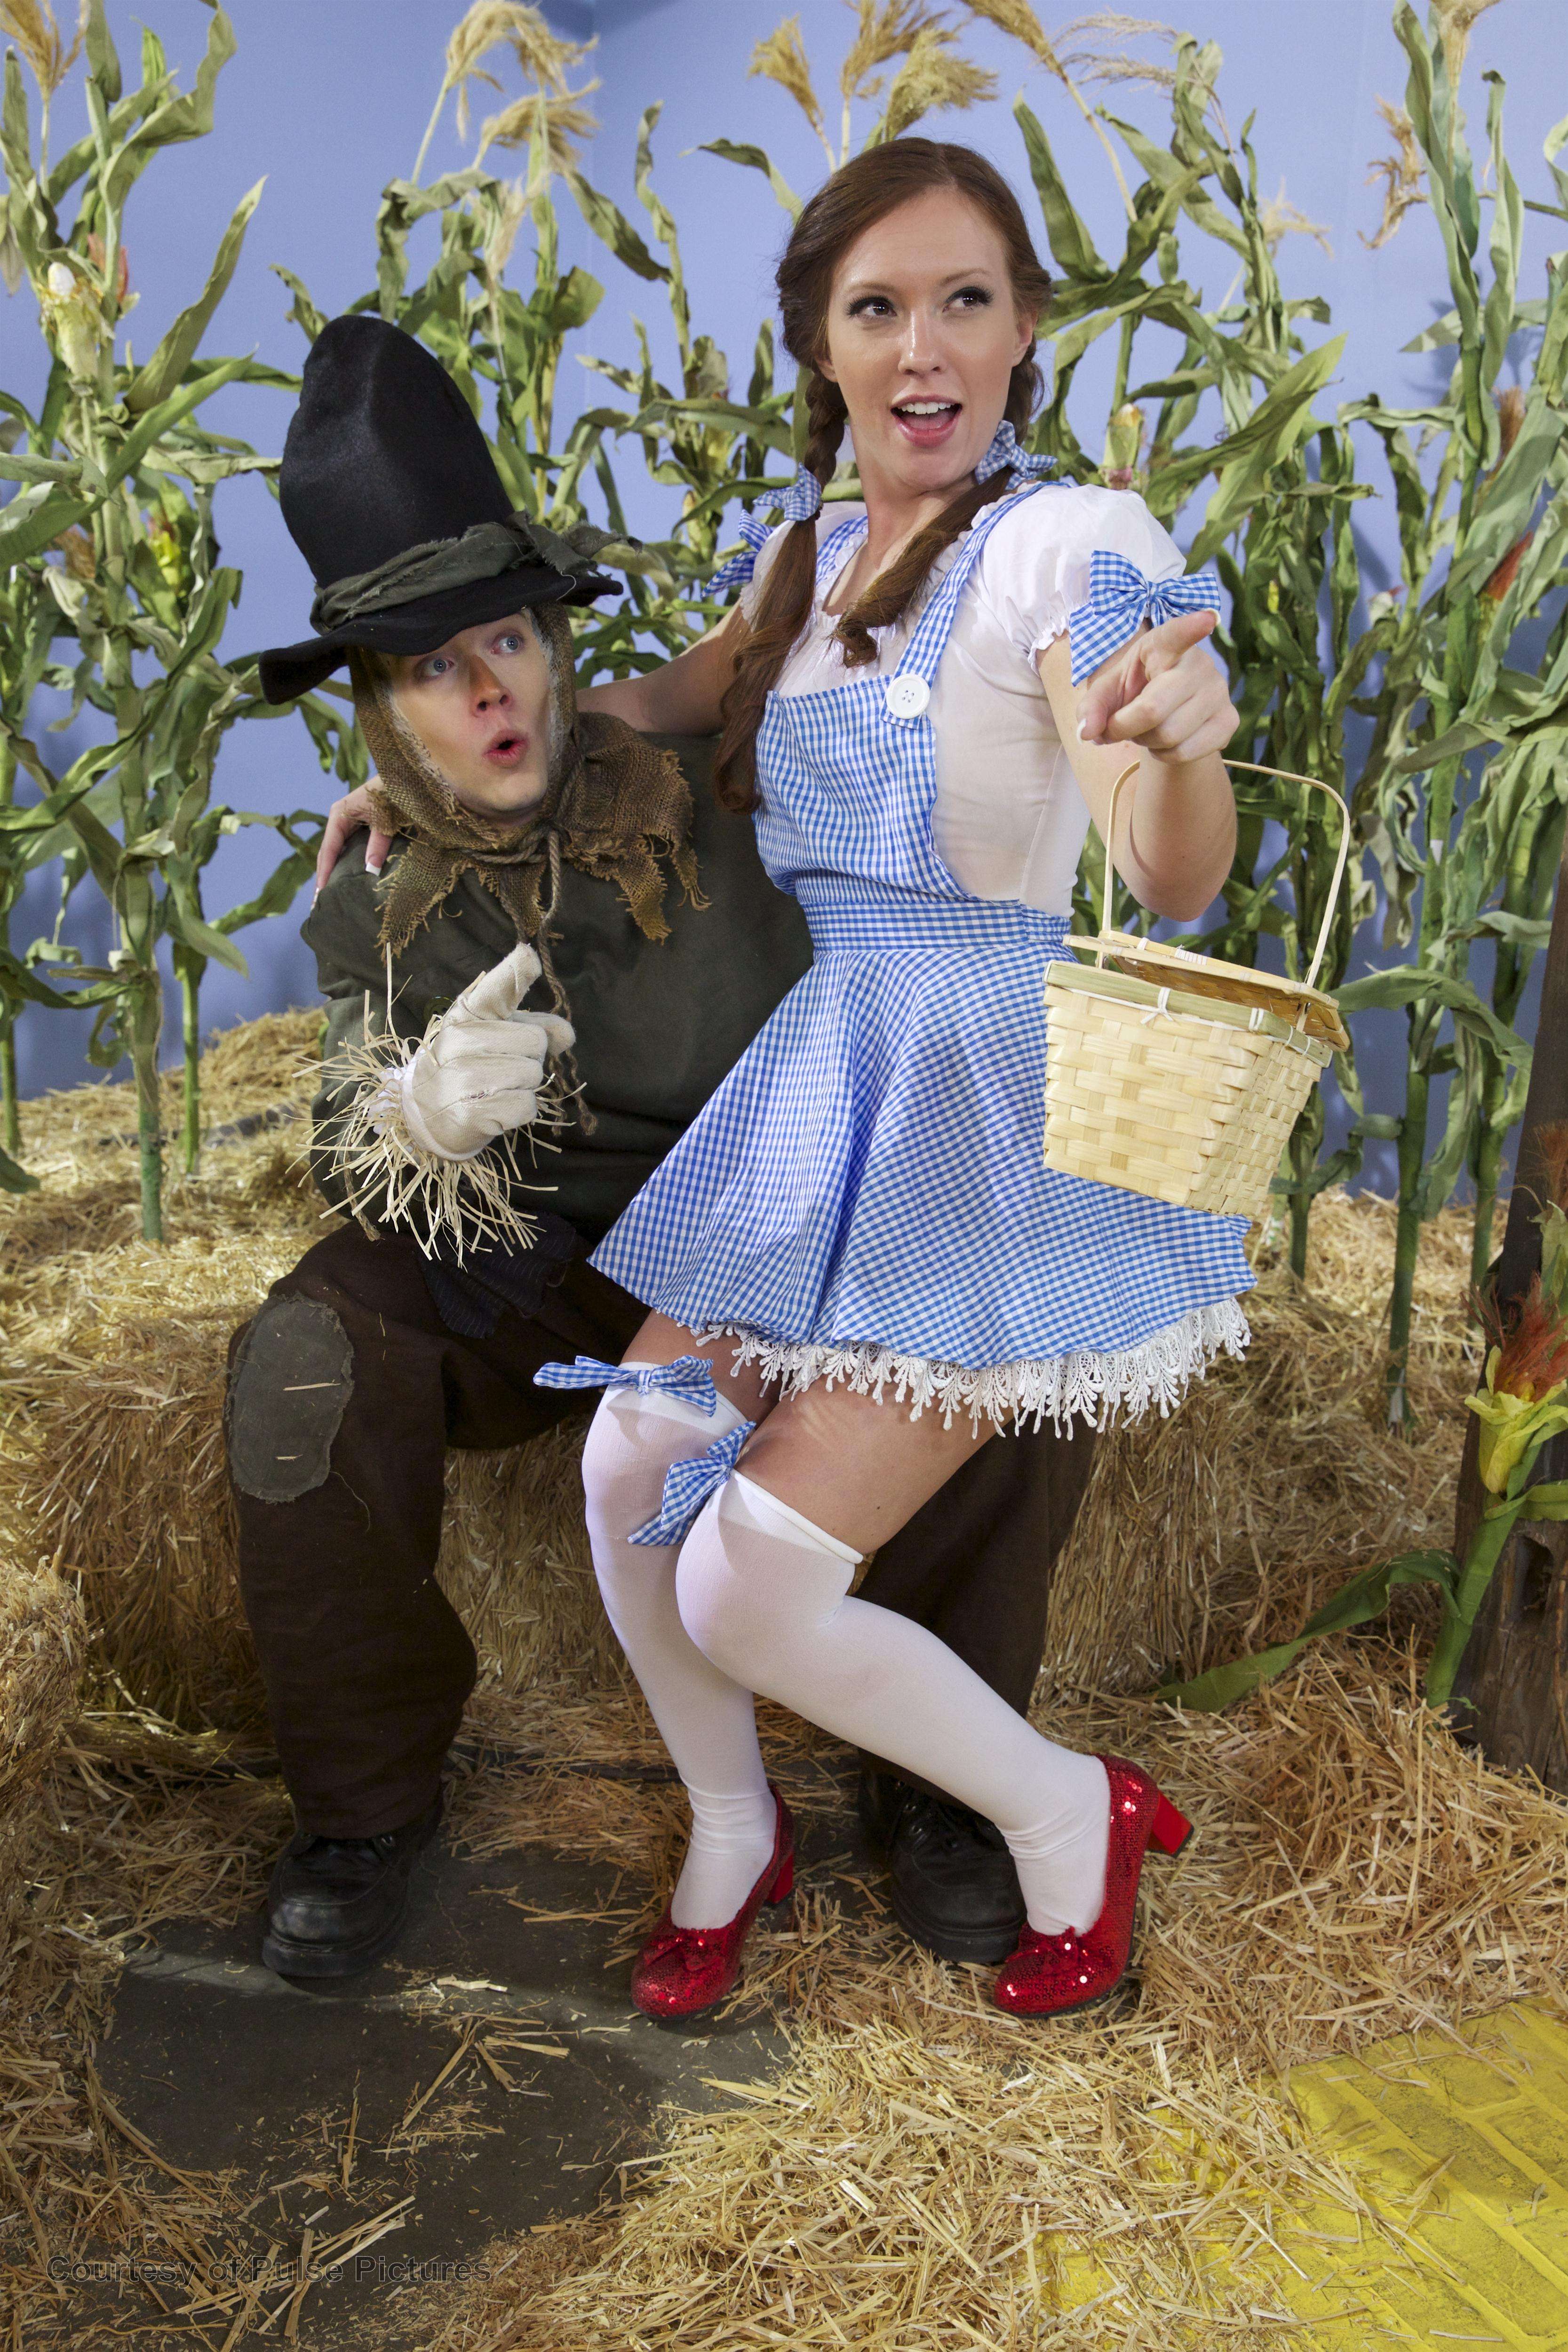 Not wizard of oz hot threesome free pics watch